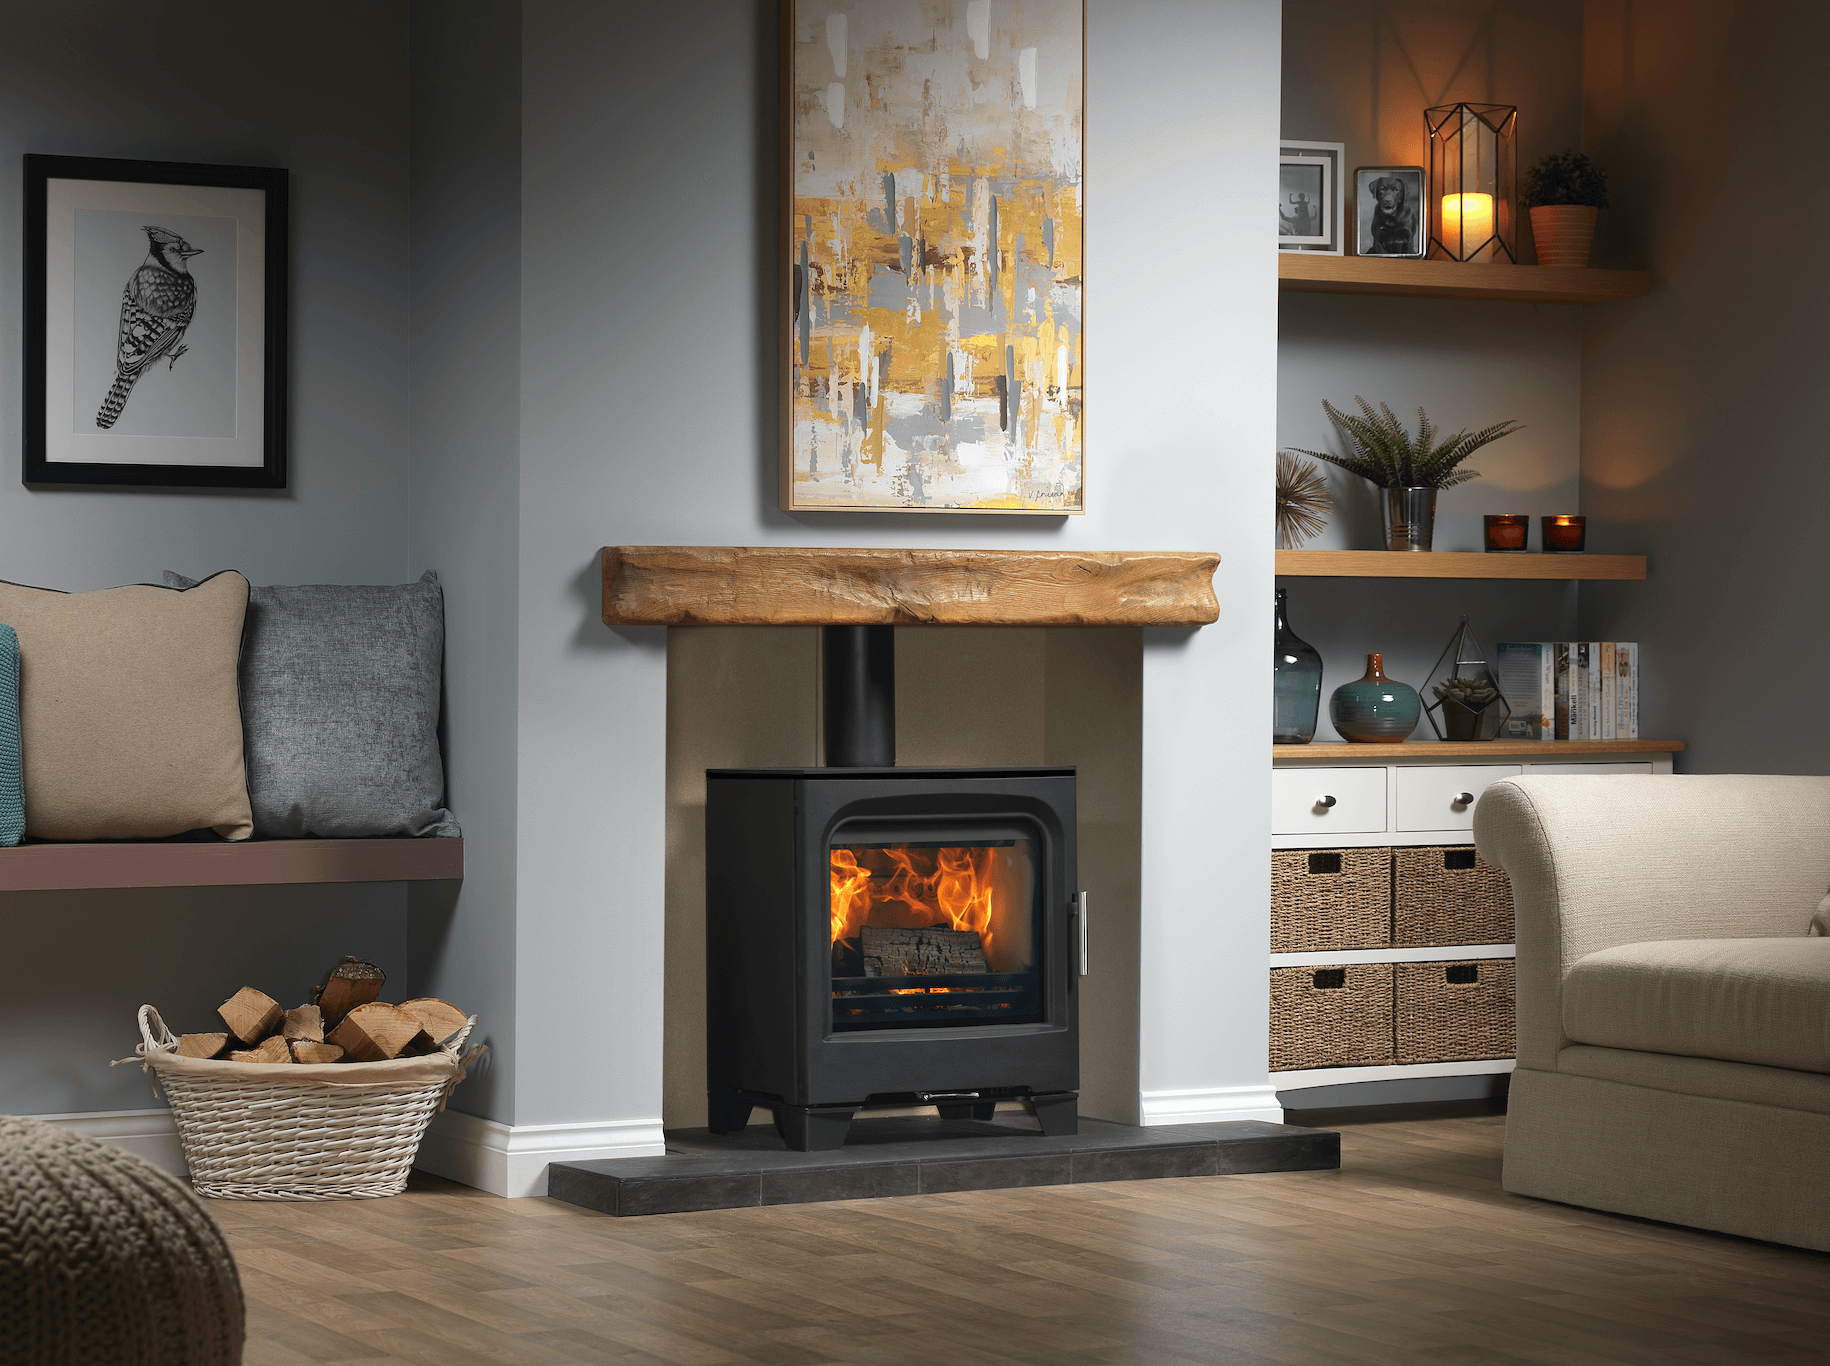 Take Control with Wood Burning Stoves